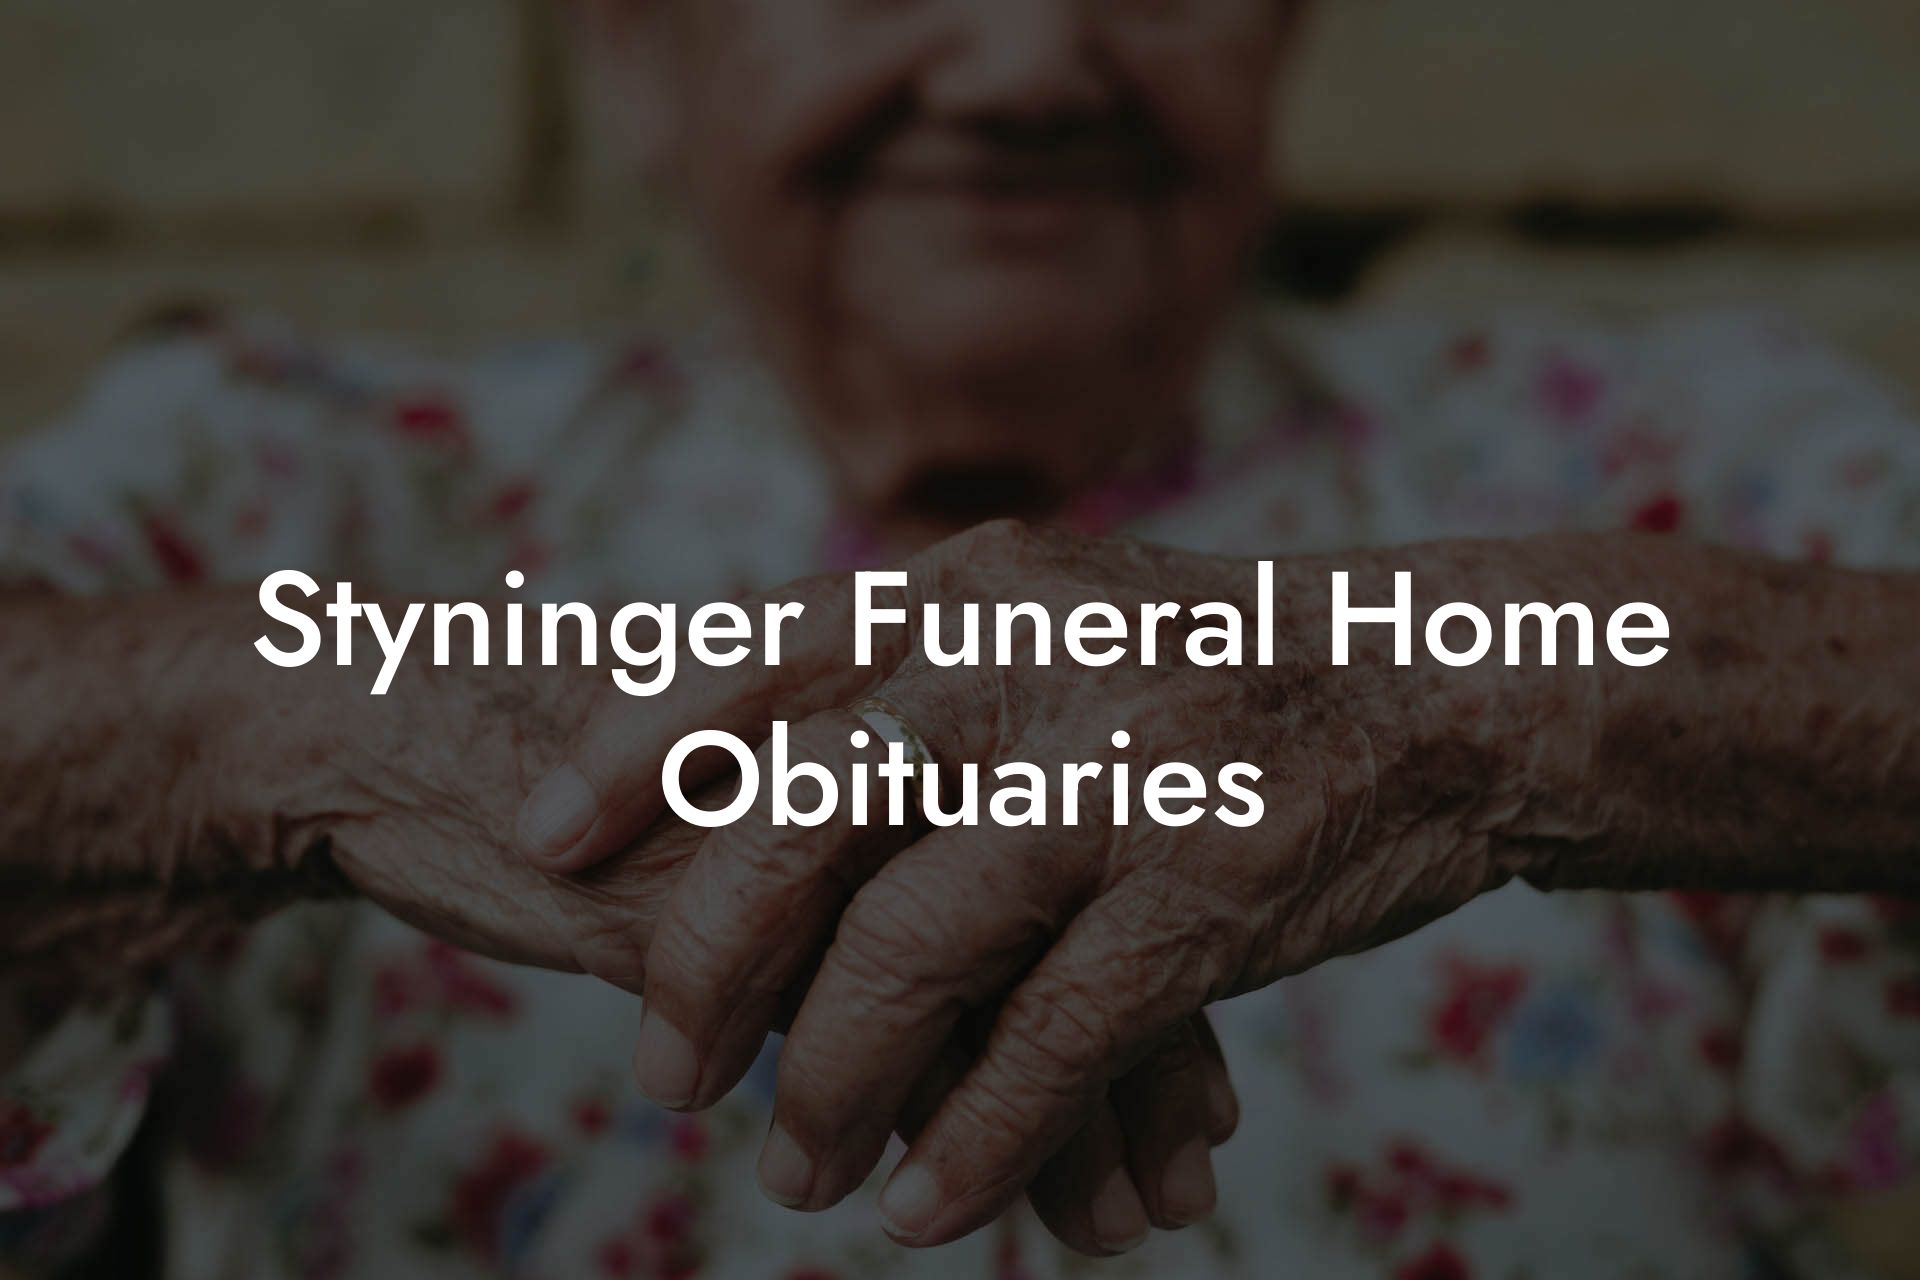 Styninger Funeral Home Obituaries